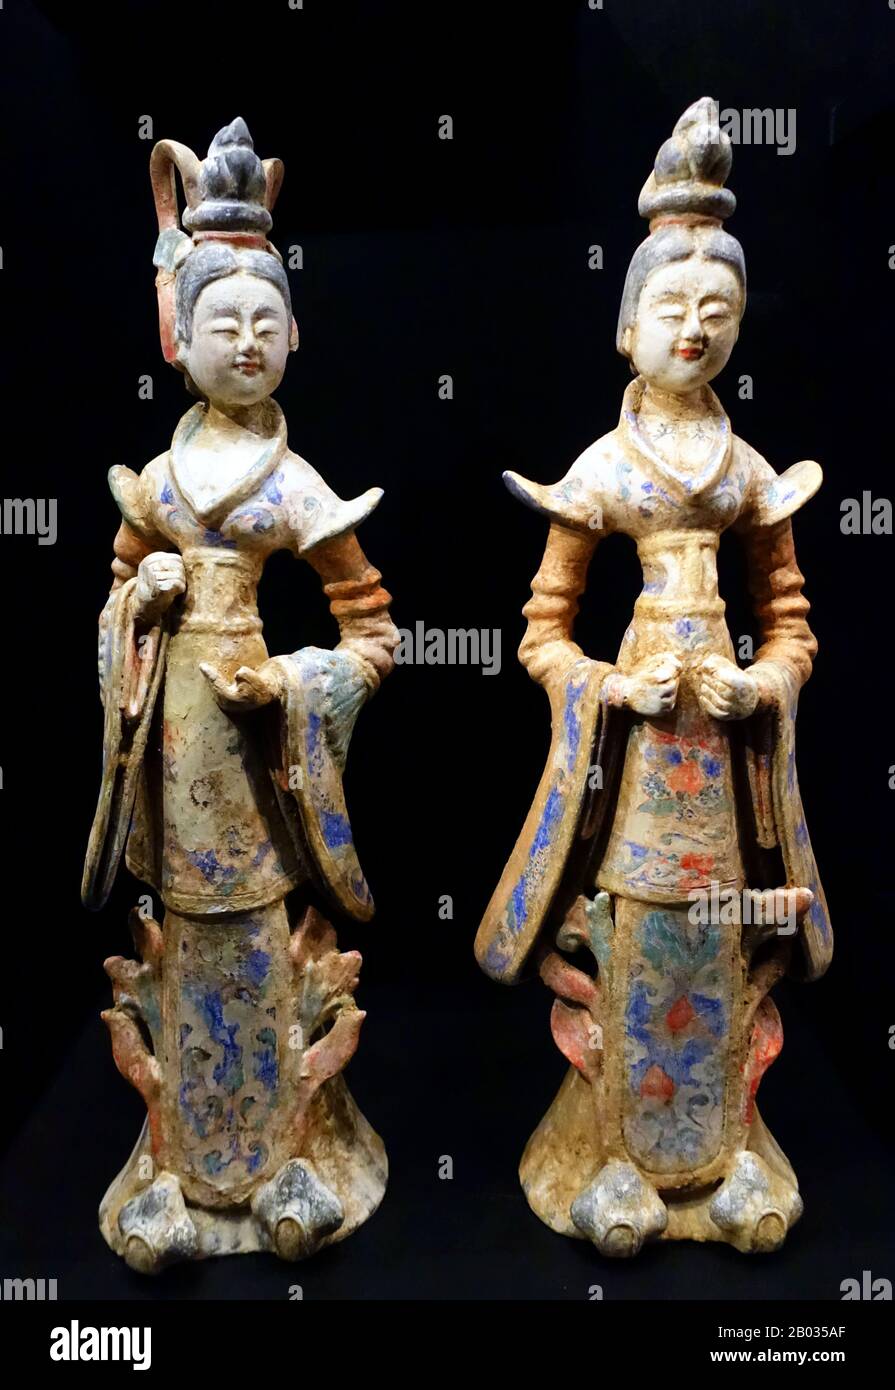 The Tang Dynasty ( June 18, 618 – June 1, 907) was an imperial dynasty of China preceded by the Sui Dynasty and followed by the Five Dynasties and Ten Kingdoms Period. It was founded by the Li family, who seized power during the decline and collapse of the Sui Empire. The dynasty was interrupted briefly by the Second Zhou Dynasty (October 8, 690 – March 3, 705) when Empress Wu Zetian seized the throne, becoming the first and only Chinese empress regnant, ruling in her own right.  A fixed group of figures was generally positioned just outside the burial chamber in Tang tombs. This generally con Stock Photo